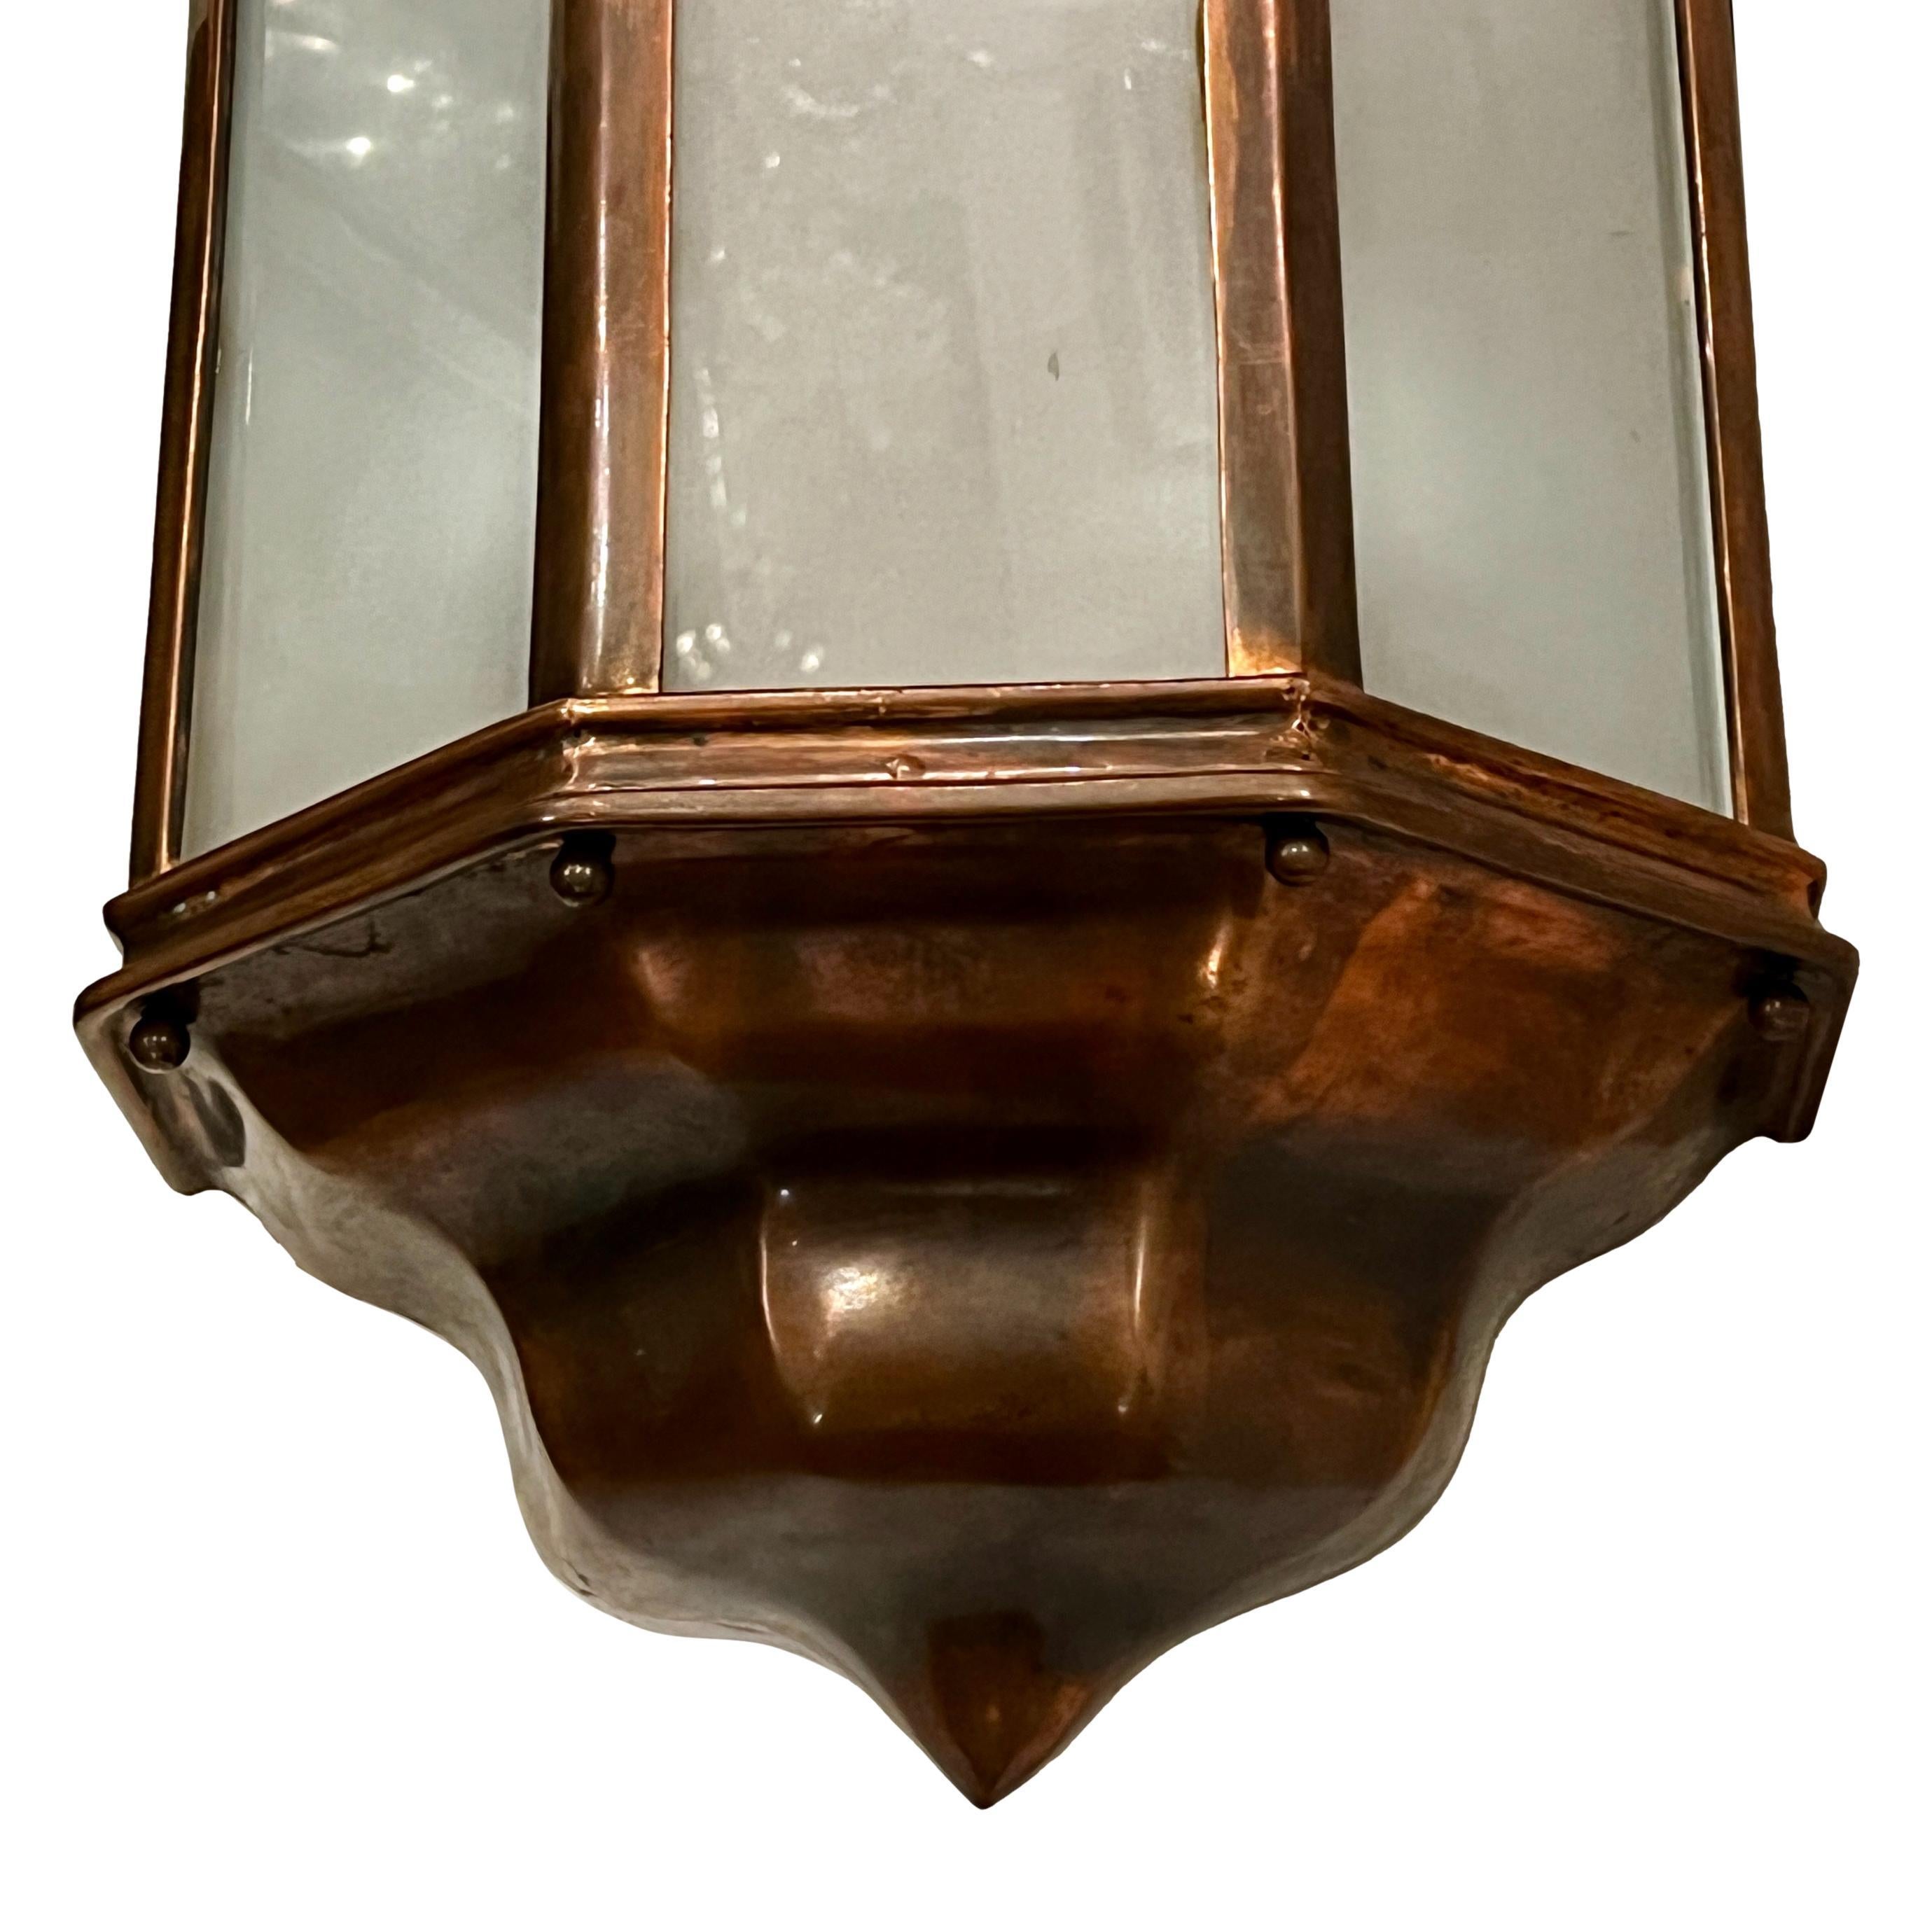 A set of twelve English circa 1940's indoor/outdoor copper sconces with frosted glass panels and interior lights. Sold per pair.

Measurements:
Height: 18